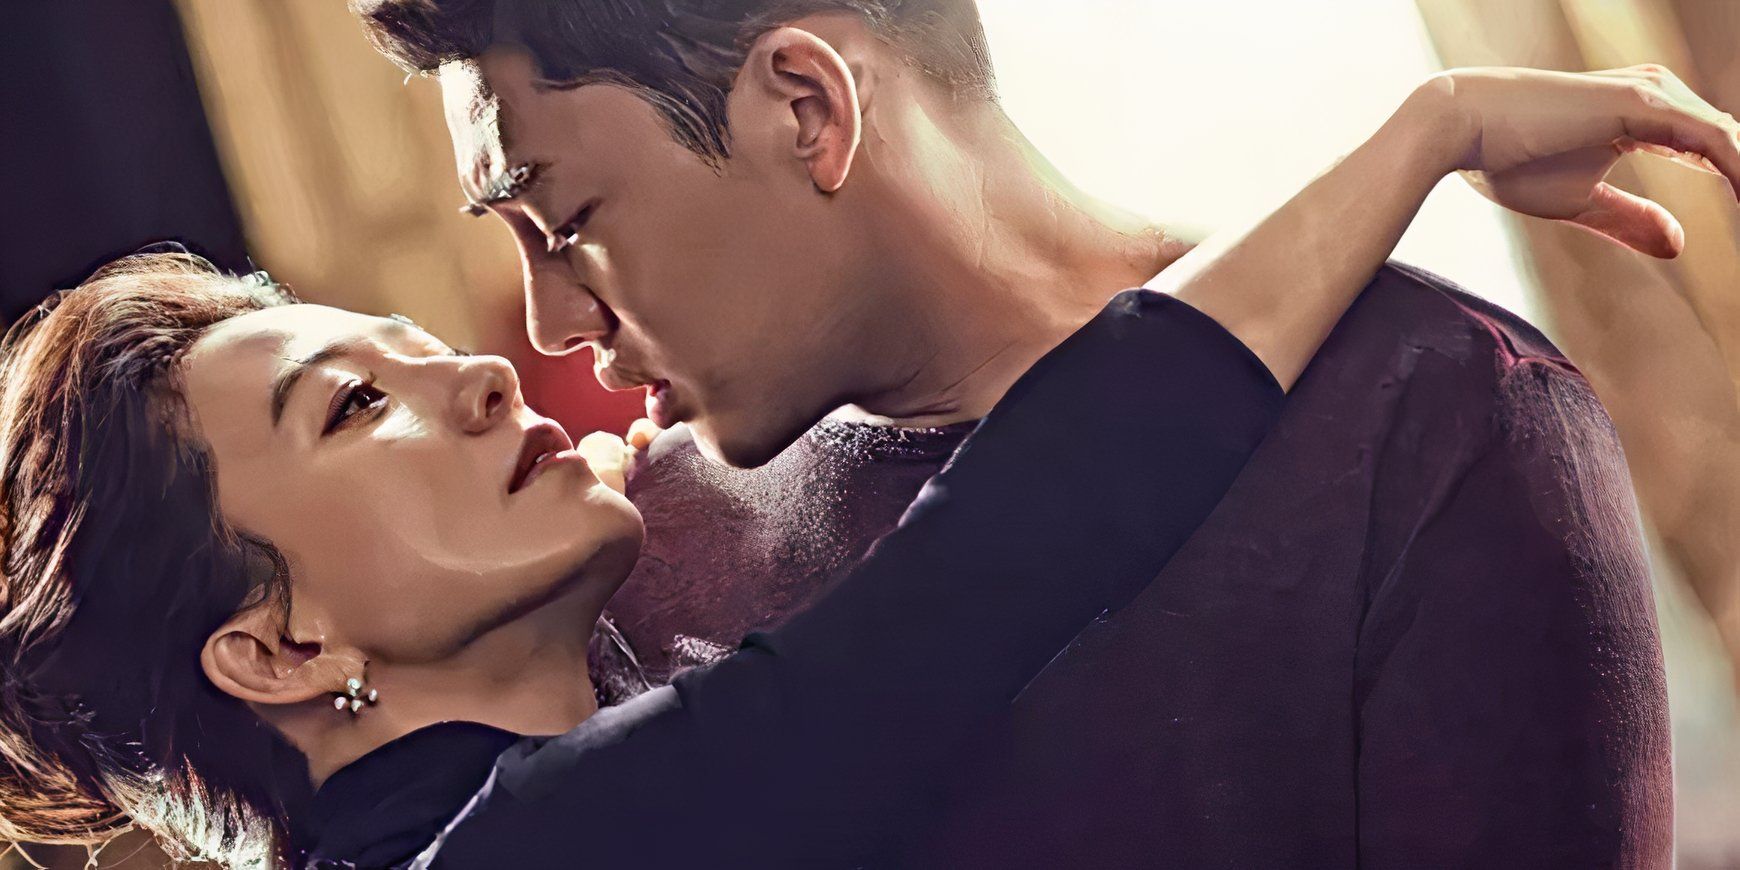 A young man and a middle aged woman passioantely embrace in the K-drama Secret Love Affair